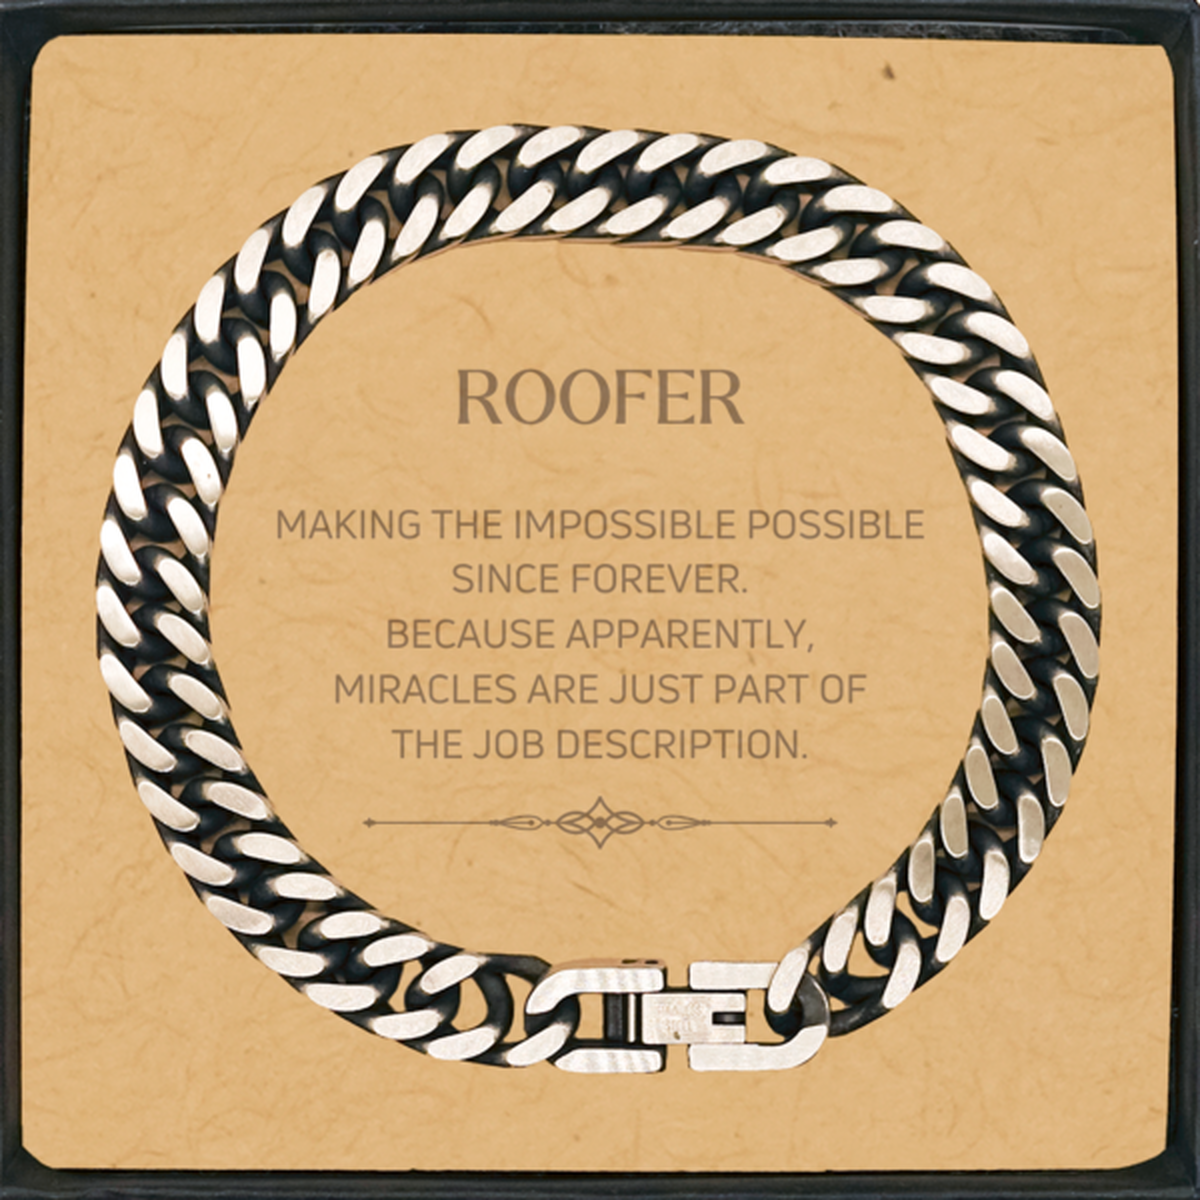 Funny Roofer Gifts, Miracles are just part of the job description, Inspirational Birthday Cuban Link Chain Bracelet For Roofer, Men, Women, Coworkers, Friends, Boss